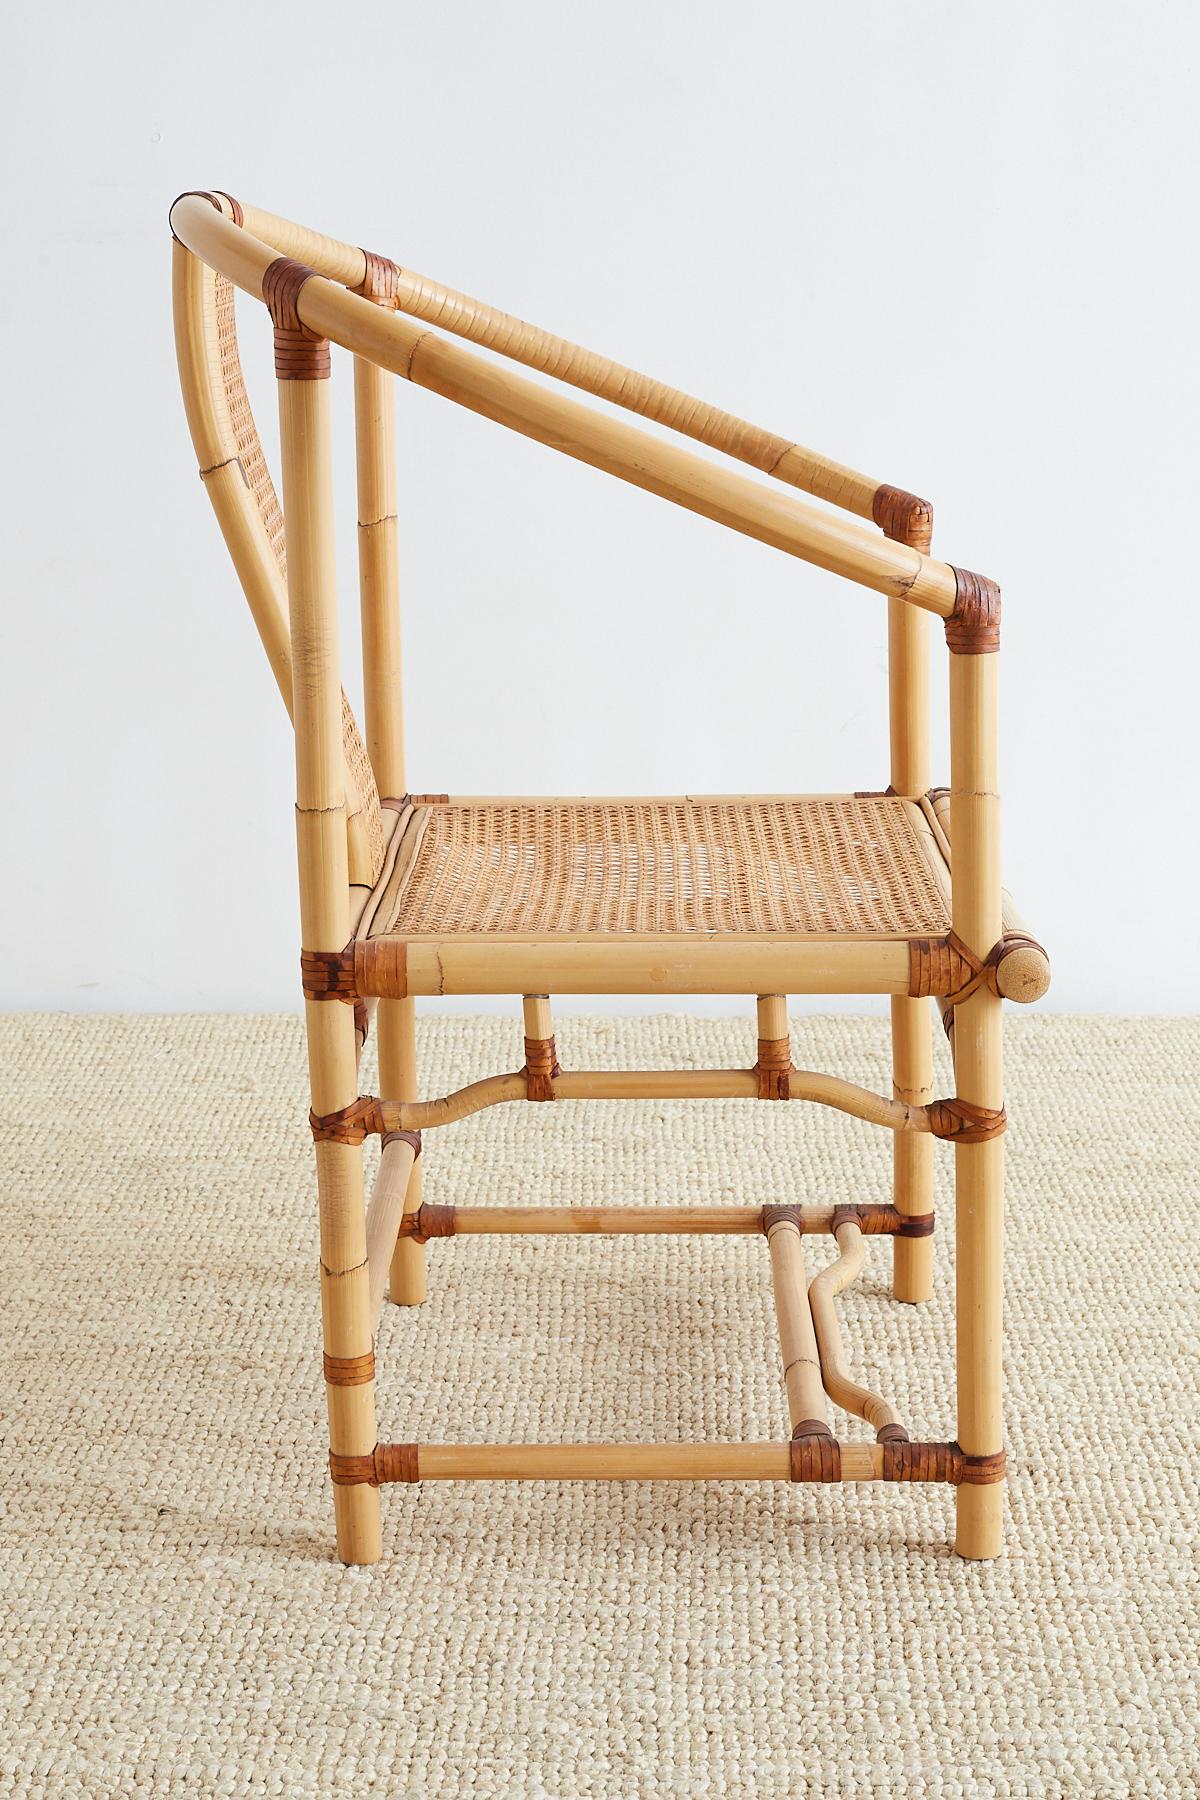 Chic Chinese style bamboo and cane horseshoe armchair featuring a light blonde bent rattan frame. Produced by Anita Vira Andika in Indonesia, probably for Wicker Works in San Francisco, CA. The backsplat and seat have been finished in cane and the